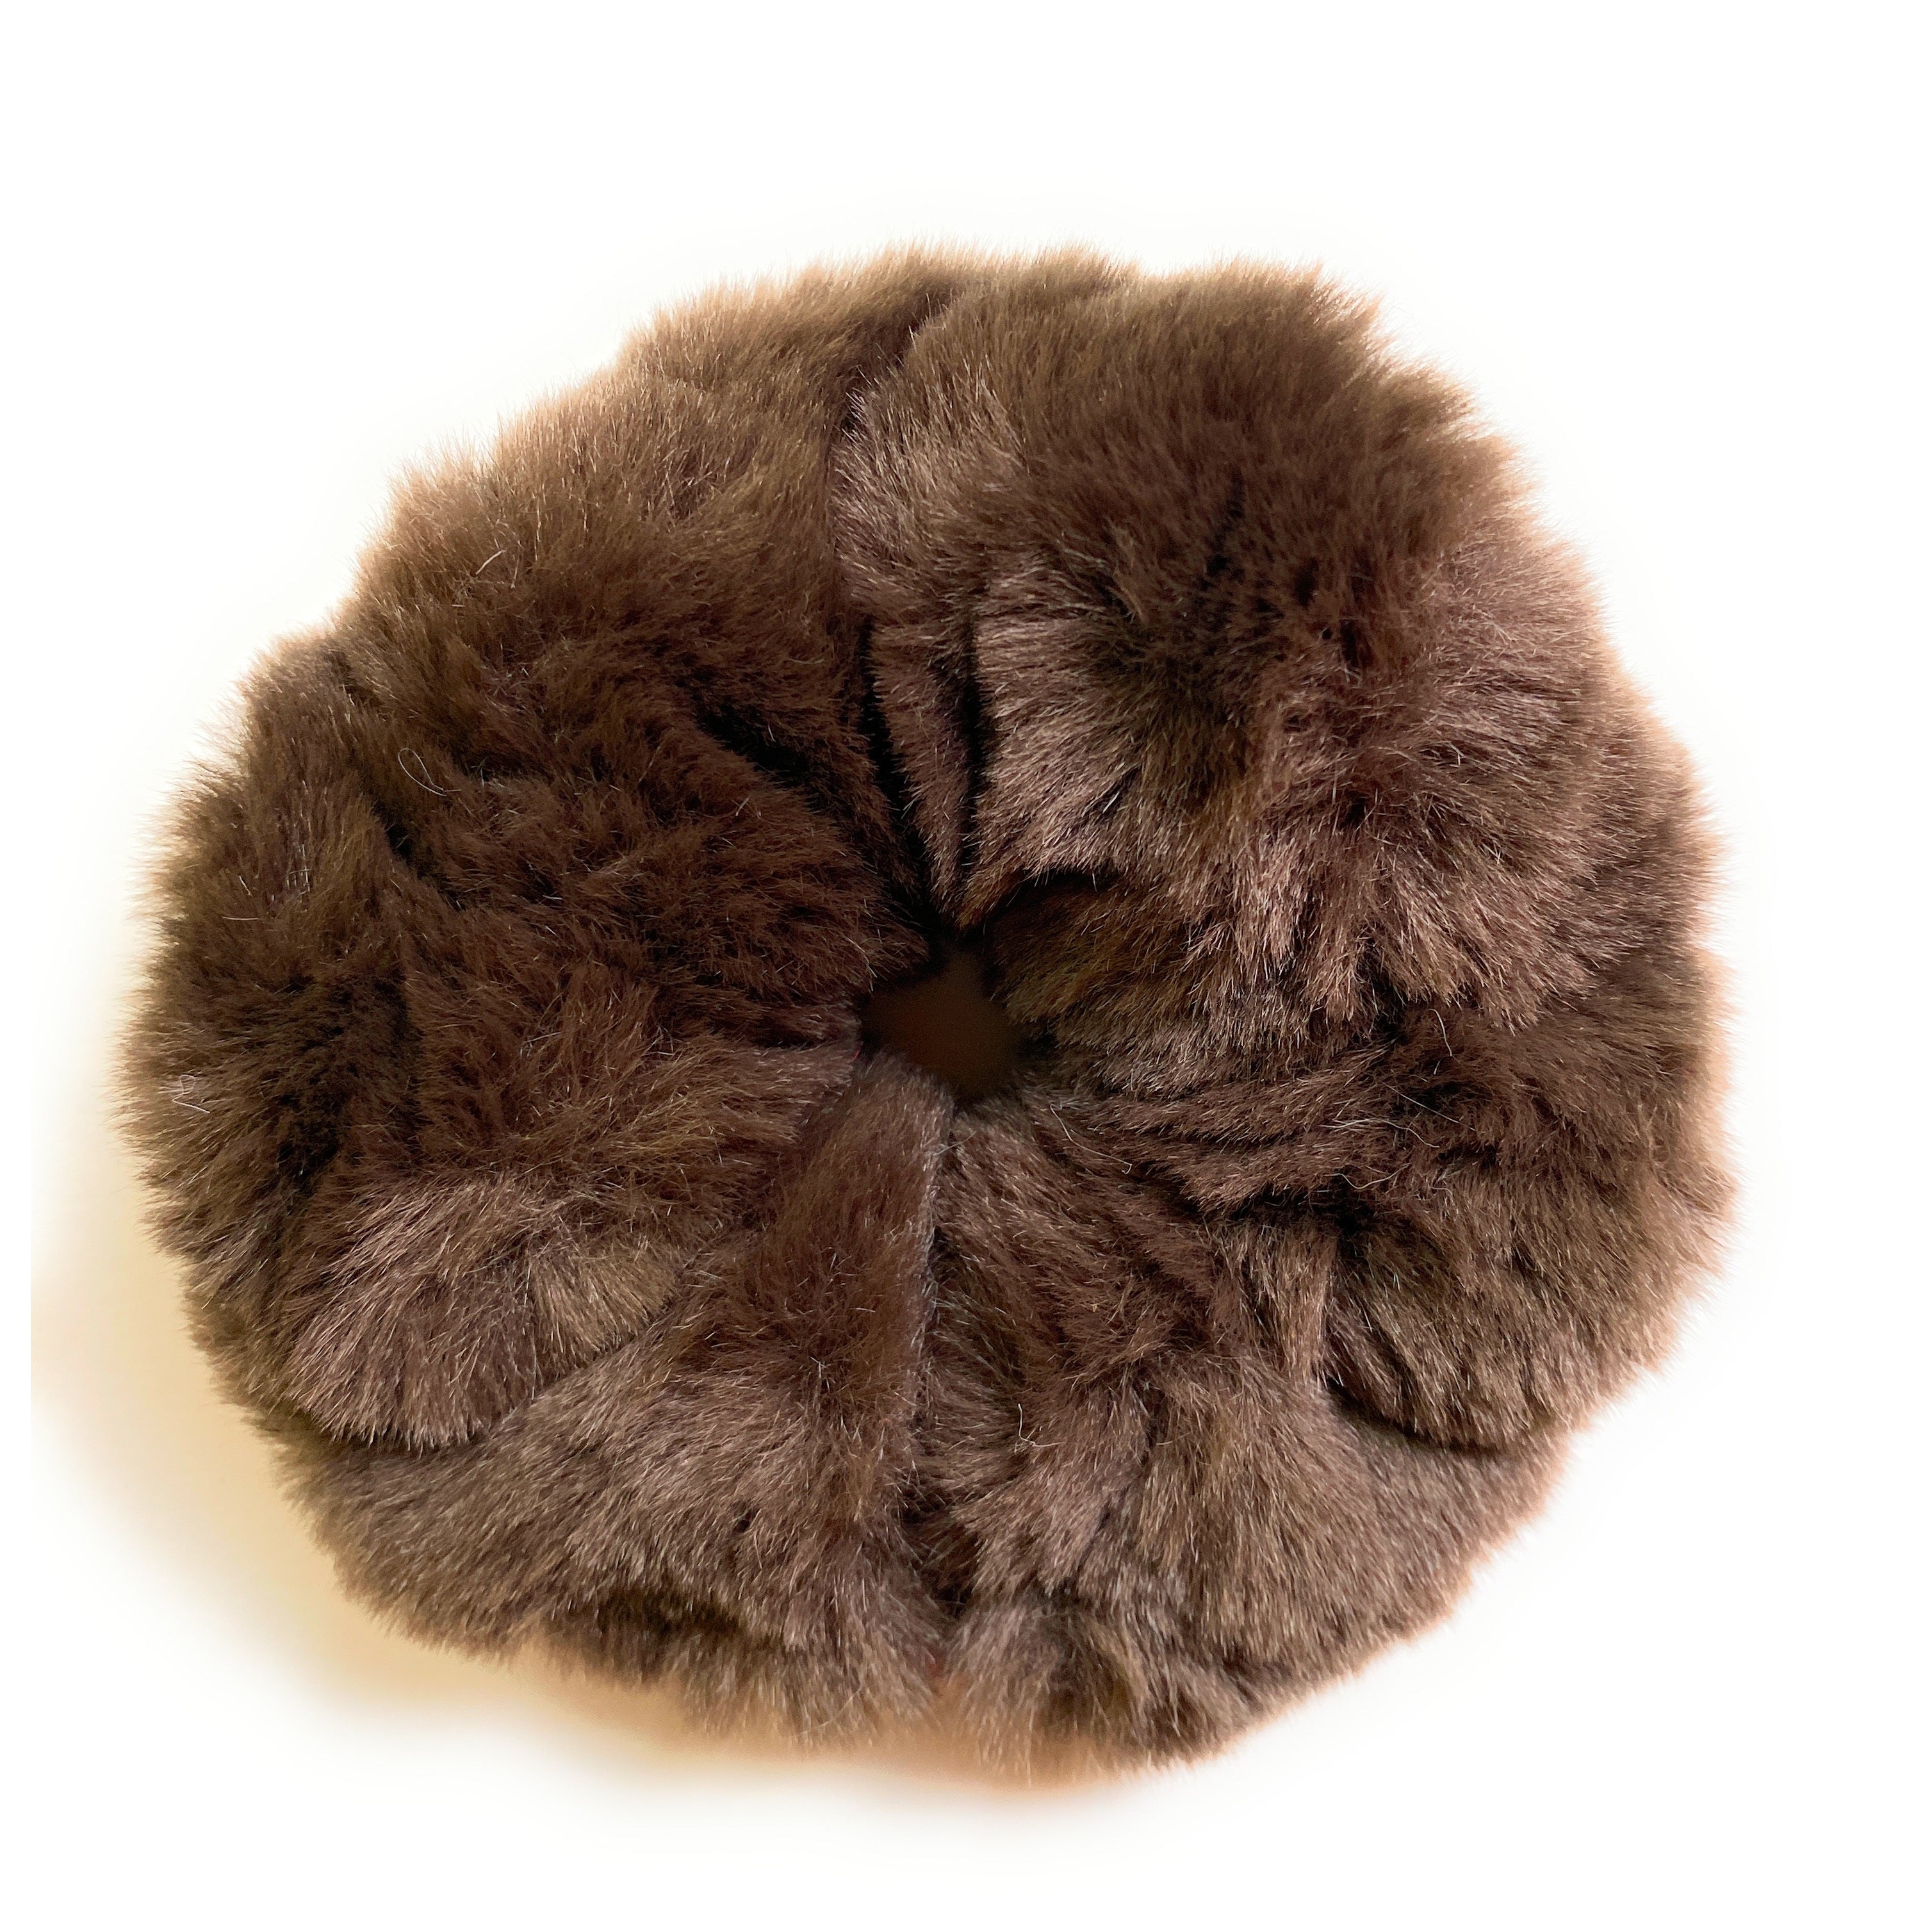 Mia Beauty Furry Scrunchie Ponytail holder hair accessory brown color